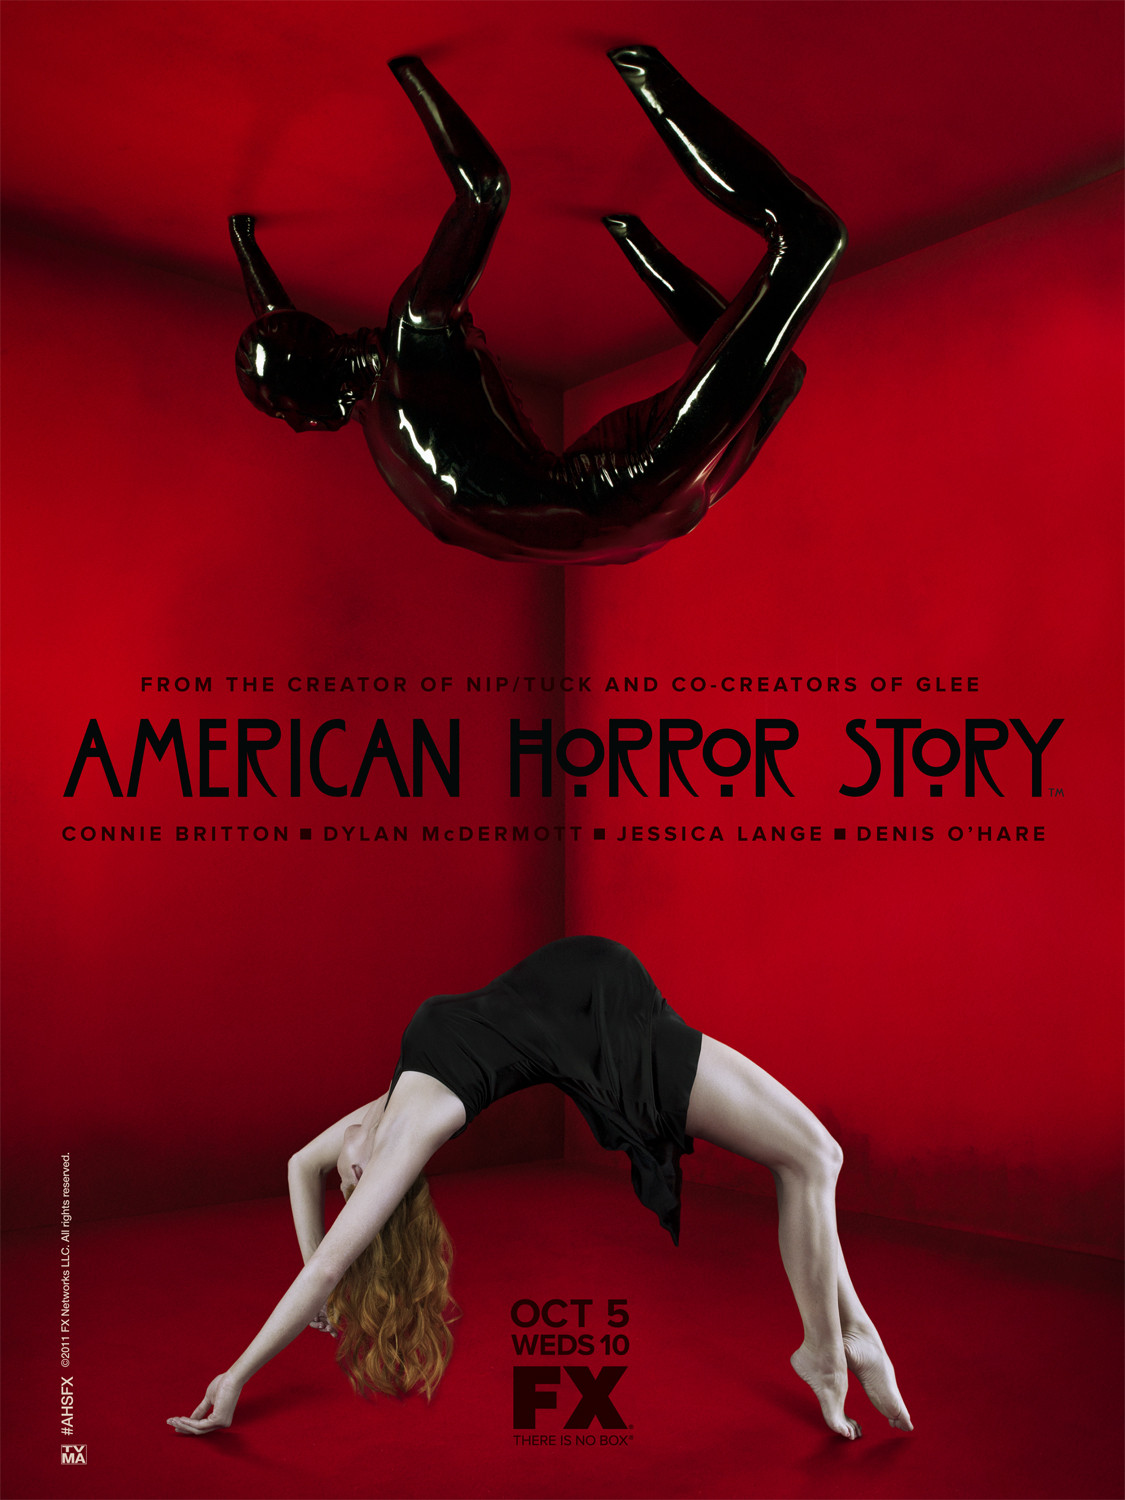 American Horror Story - Season 1 - New Promotional Poster